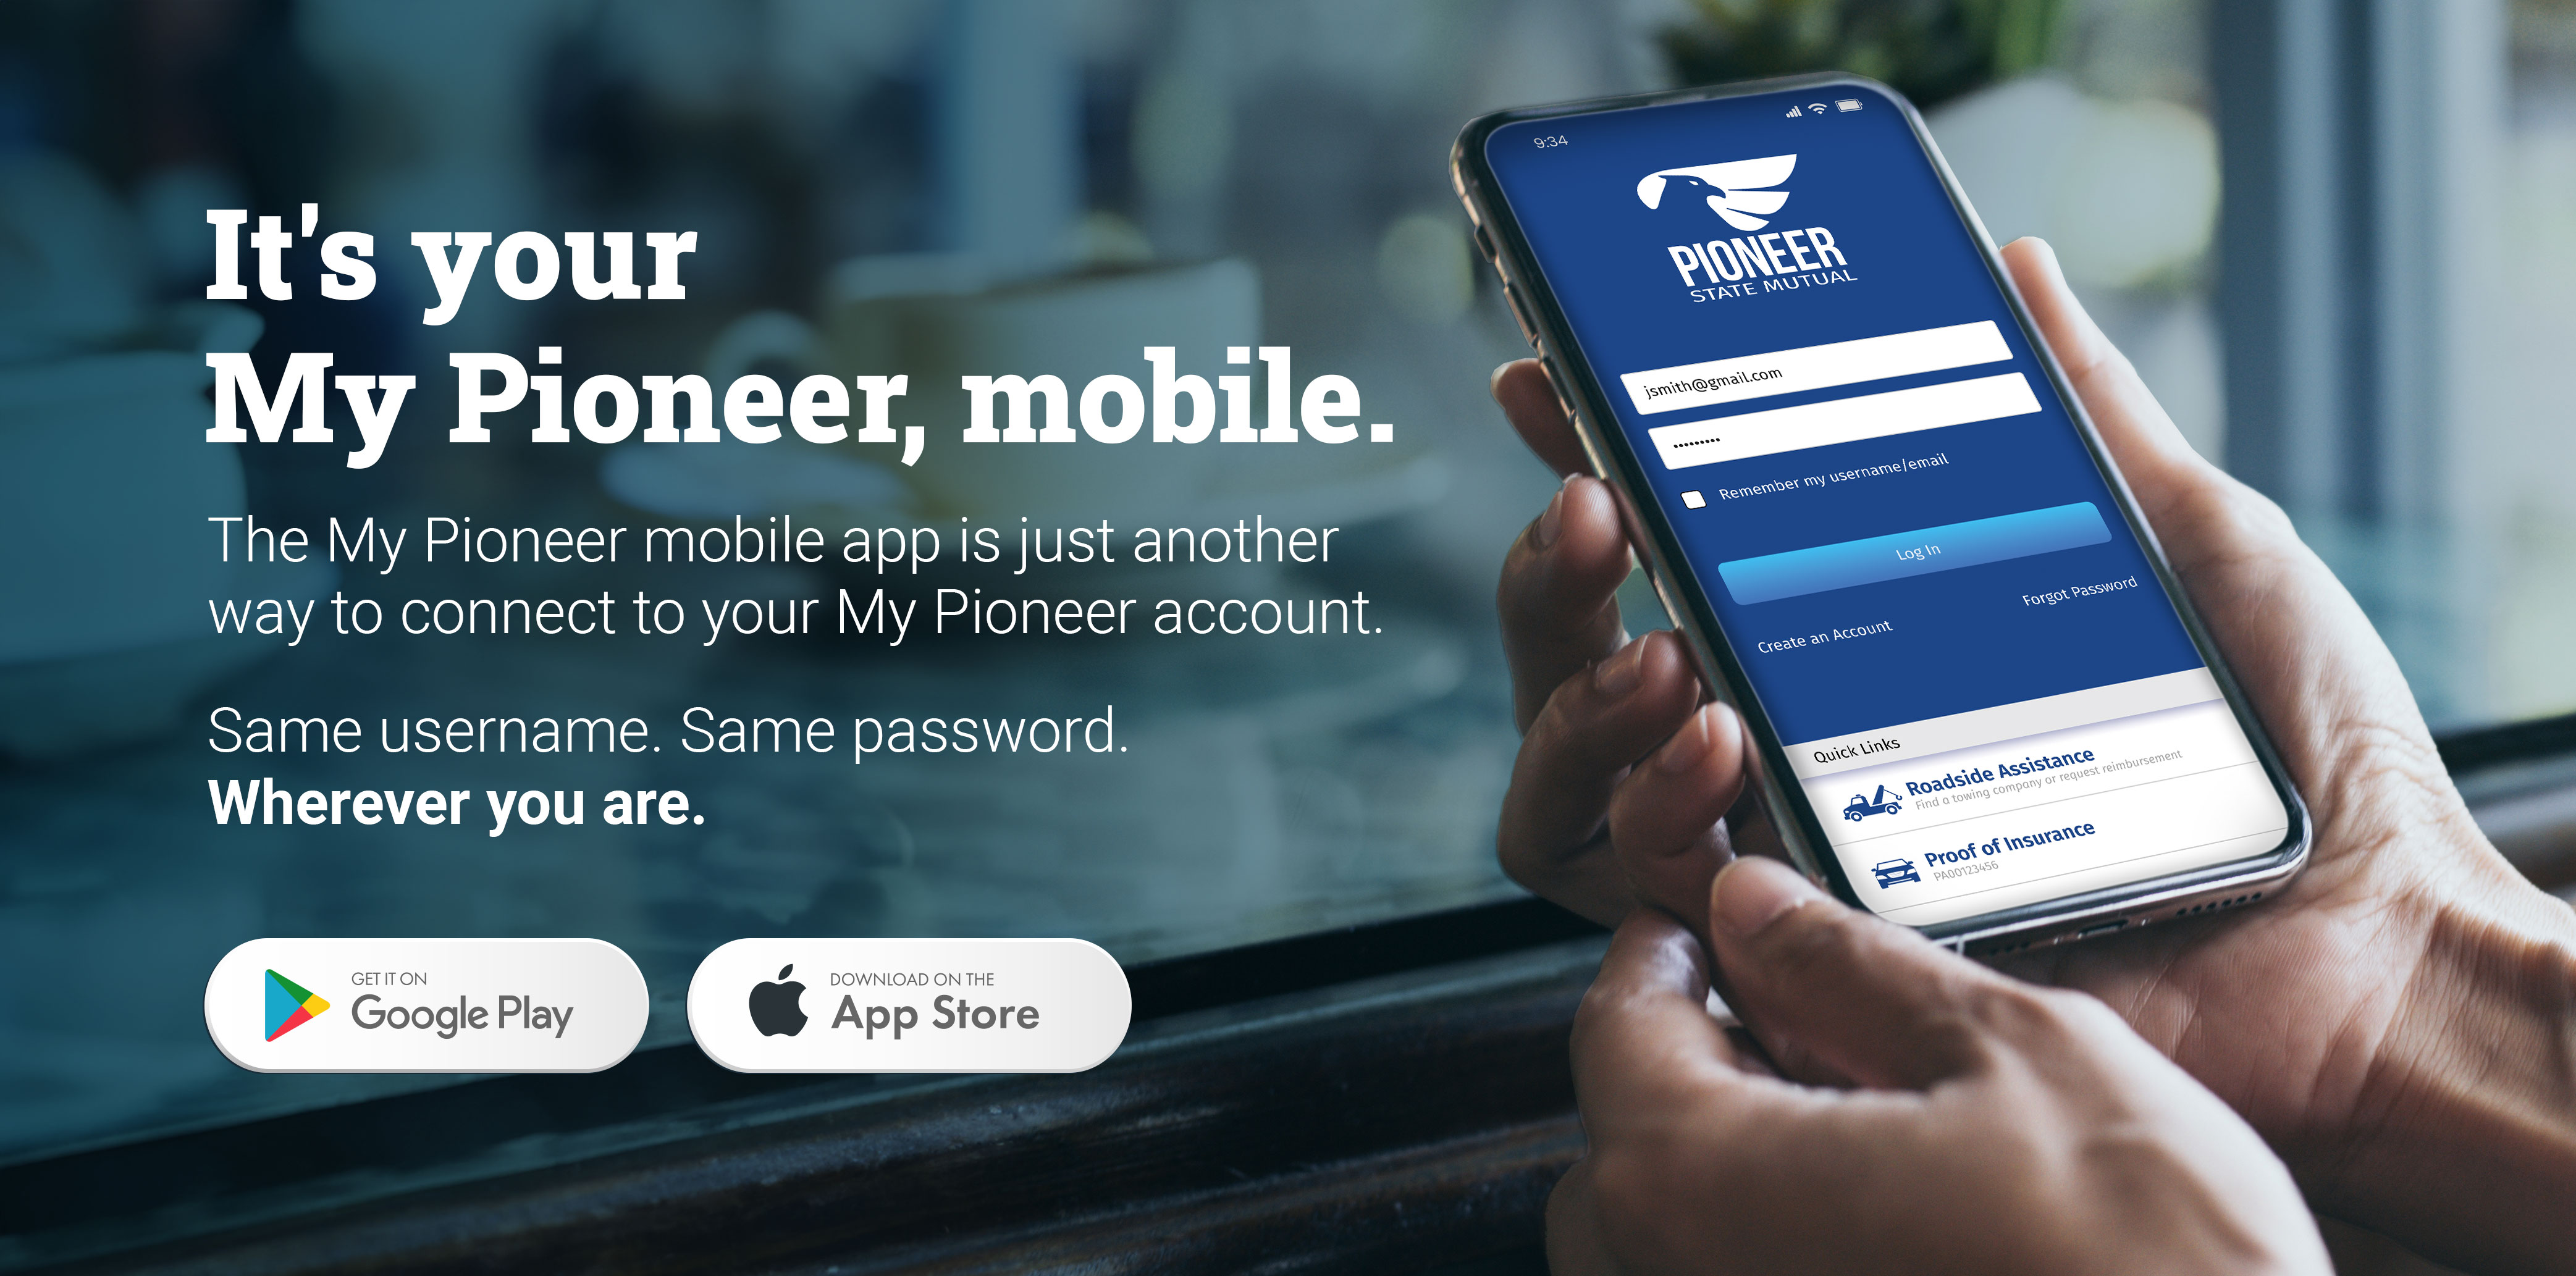 You can access your My Pioneer account via our Mobile App available for iOS and Android. Click here to learn about the mobile app features.